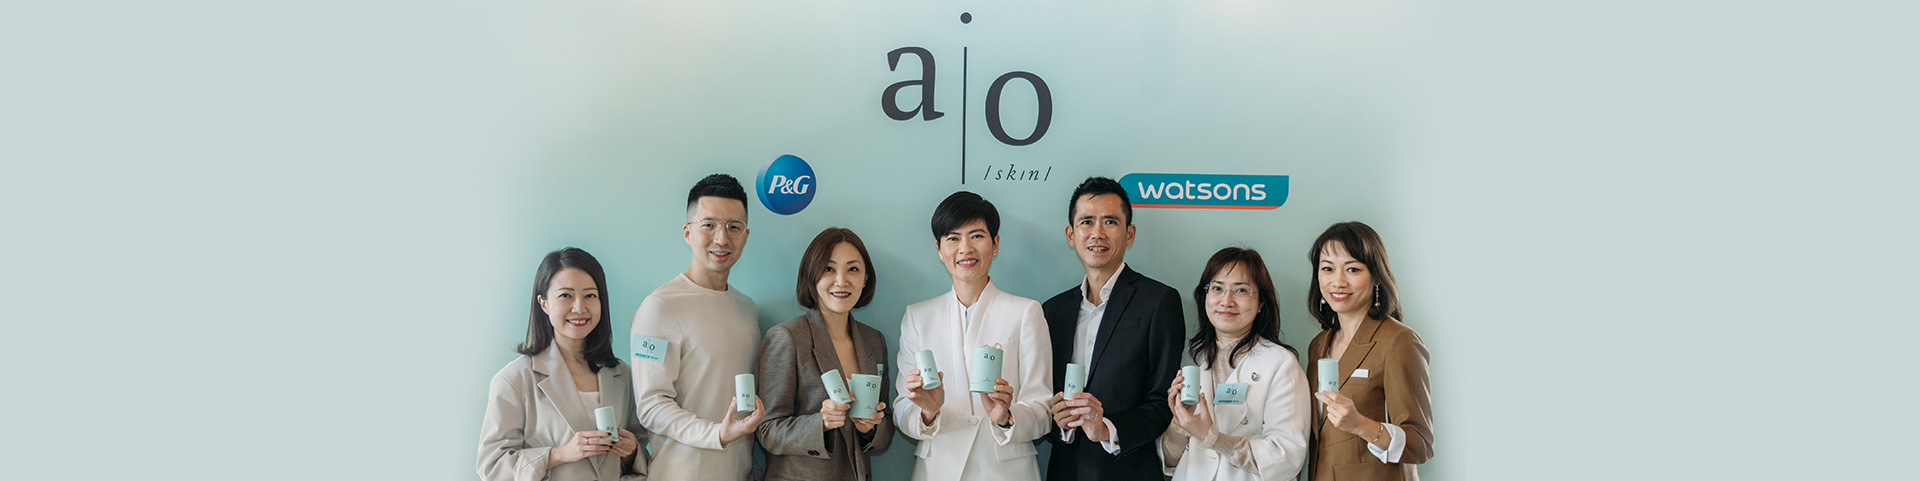 Procter & Gamble and AS Watson Group Co-create a New Japan Skincare Brand “aio”  Redefining Simplicity and Sustainability  Exclusively Available at Watsons